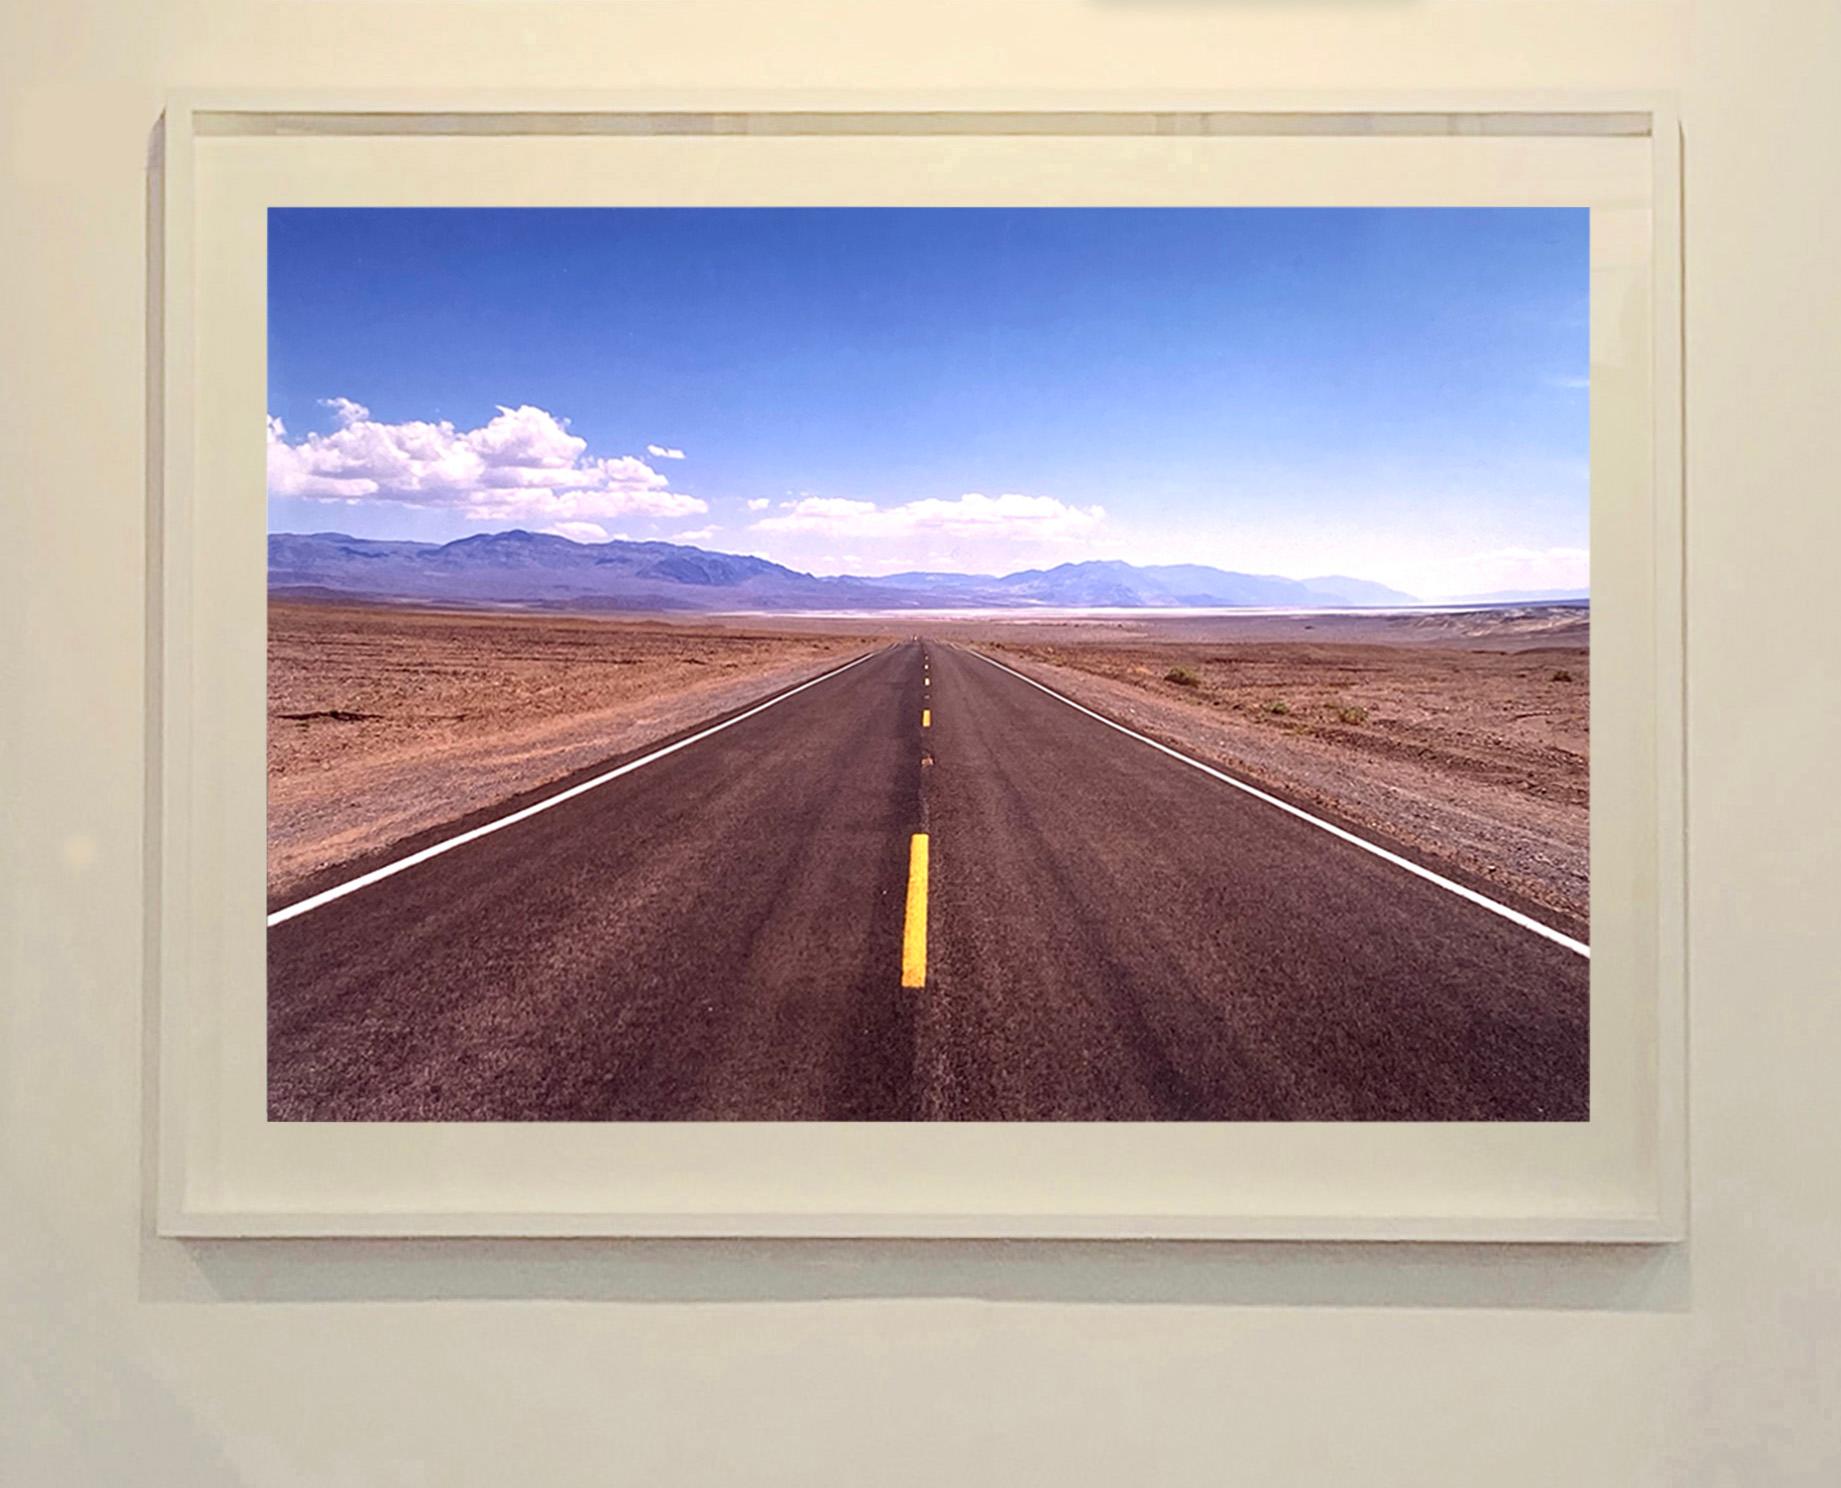 The Road to Death Valley, Mojave Desert, California - Landscape Color Photo - Pop Art Photograph by Richard Heeps